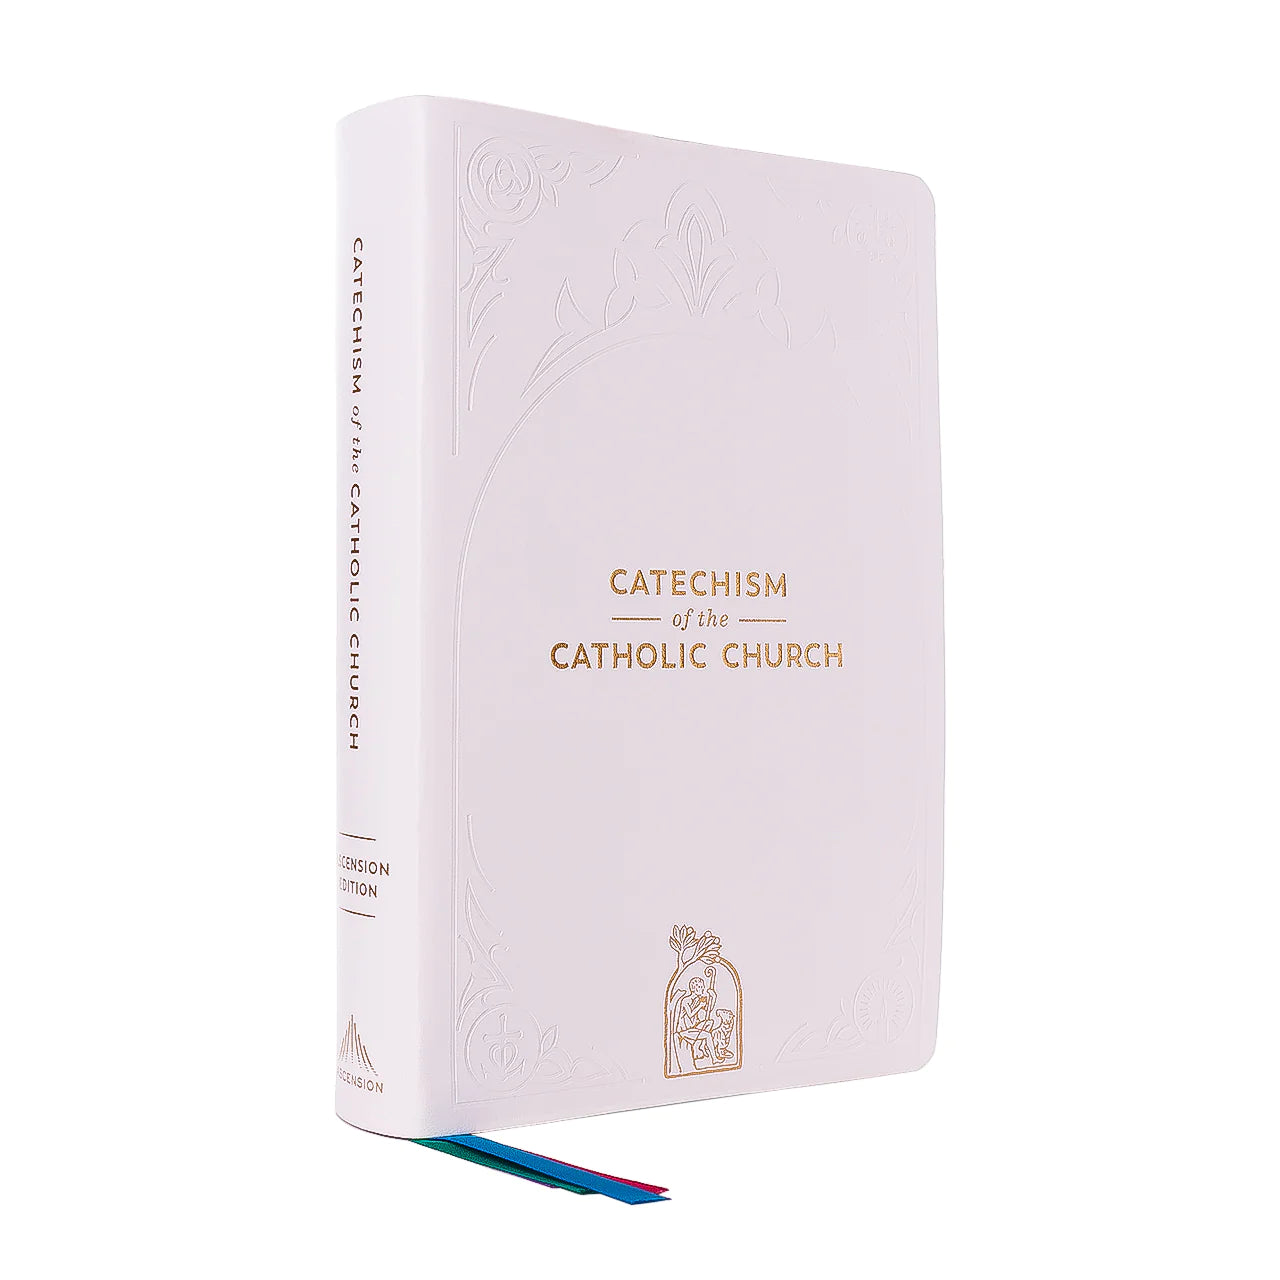 The Catechism of the Catholic Church: Ascension Edition